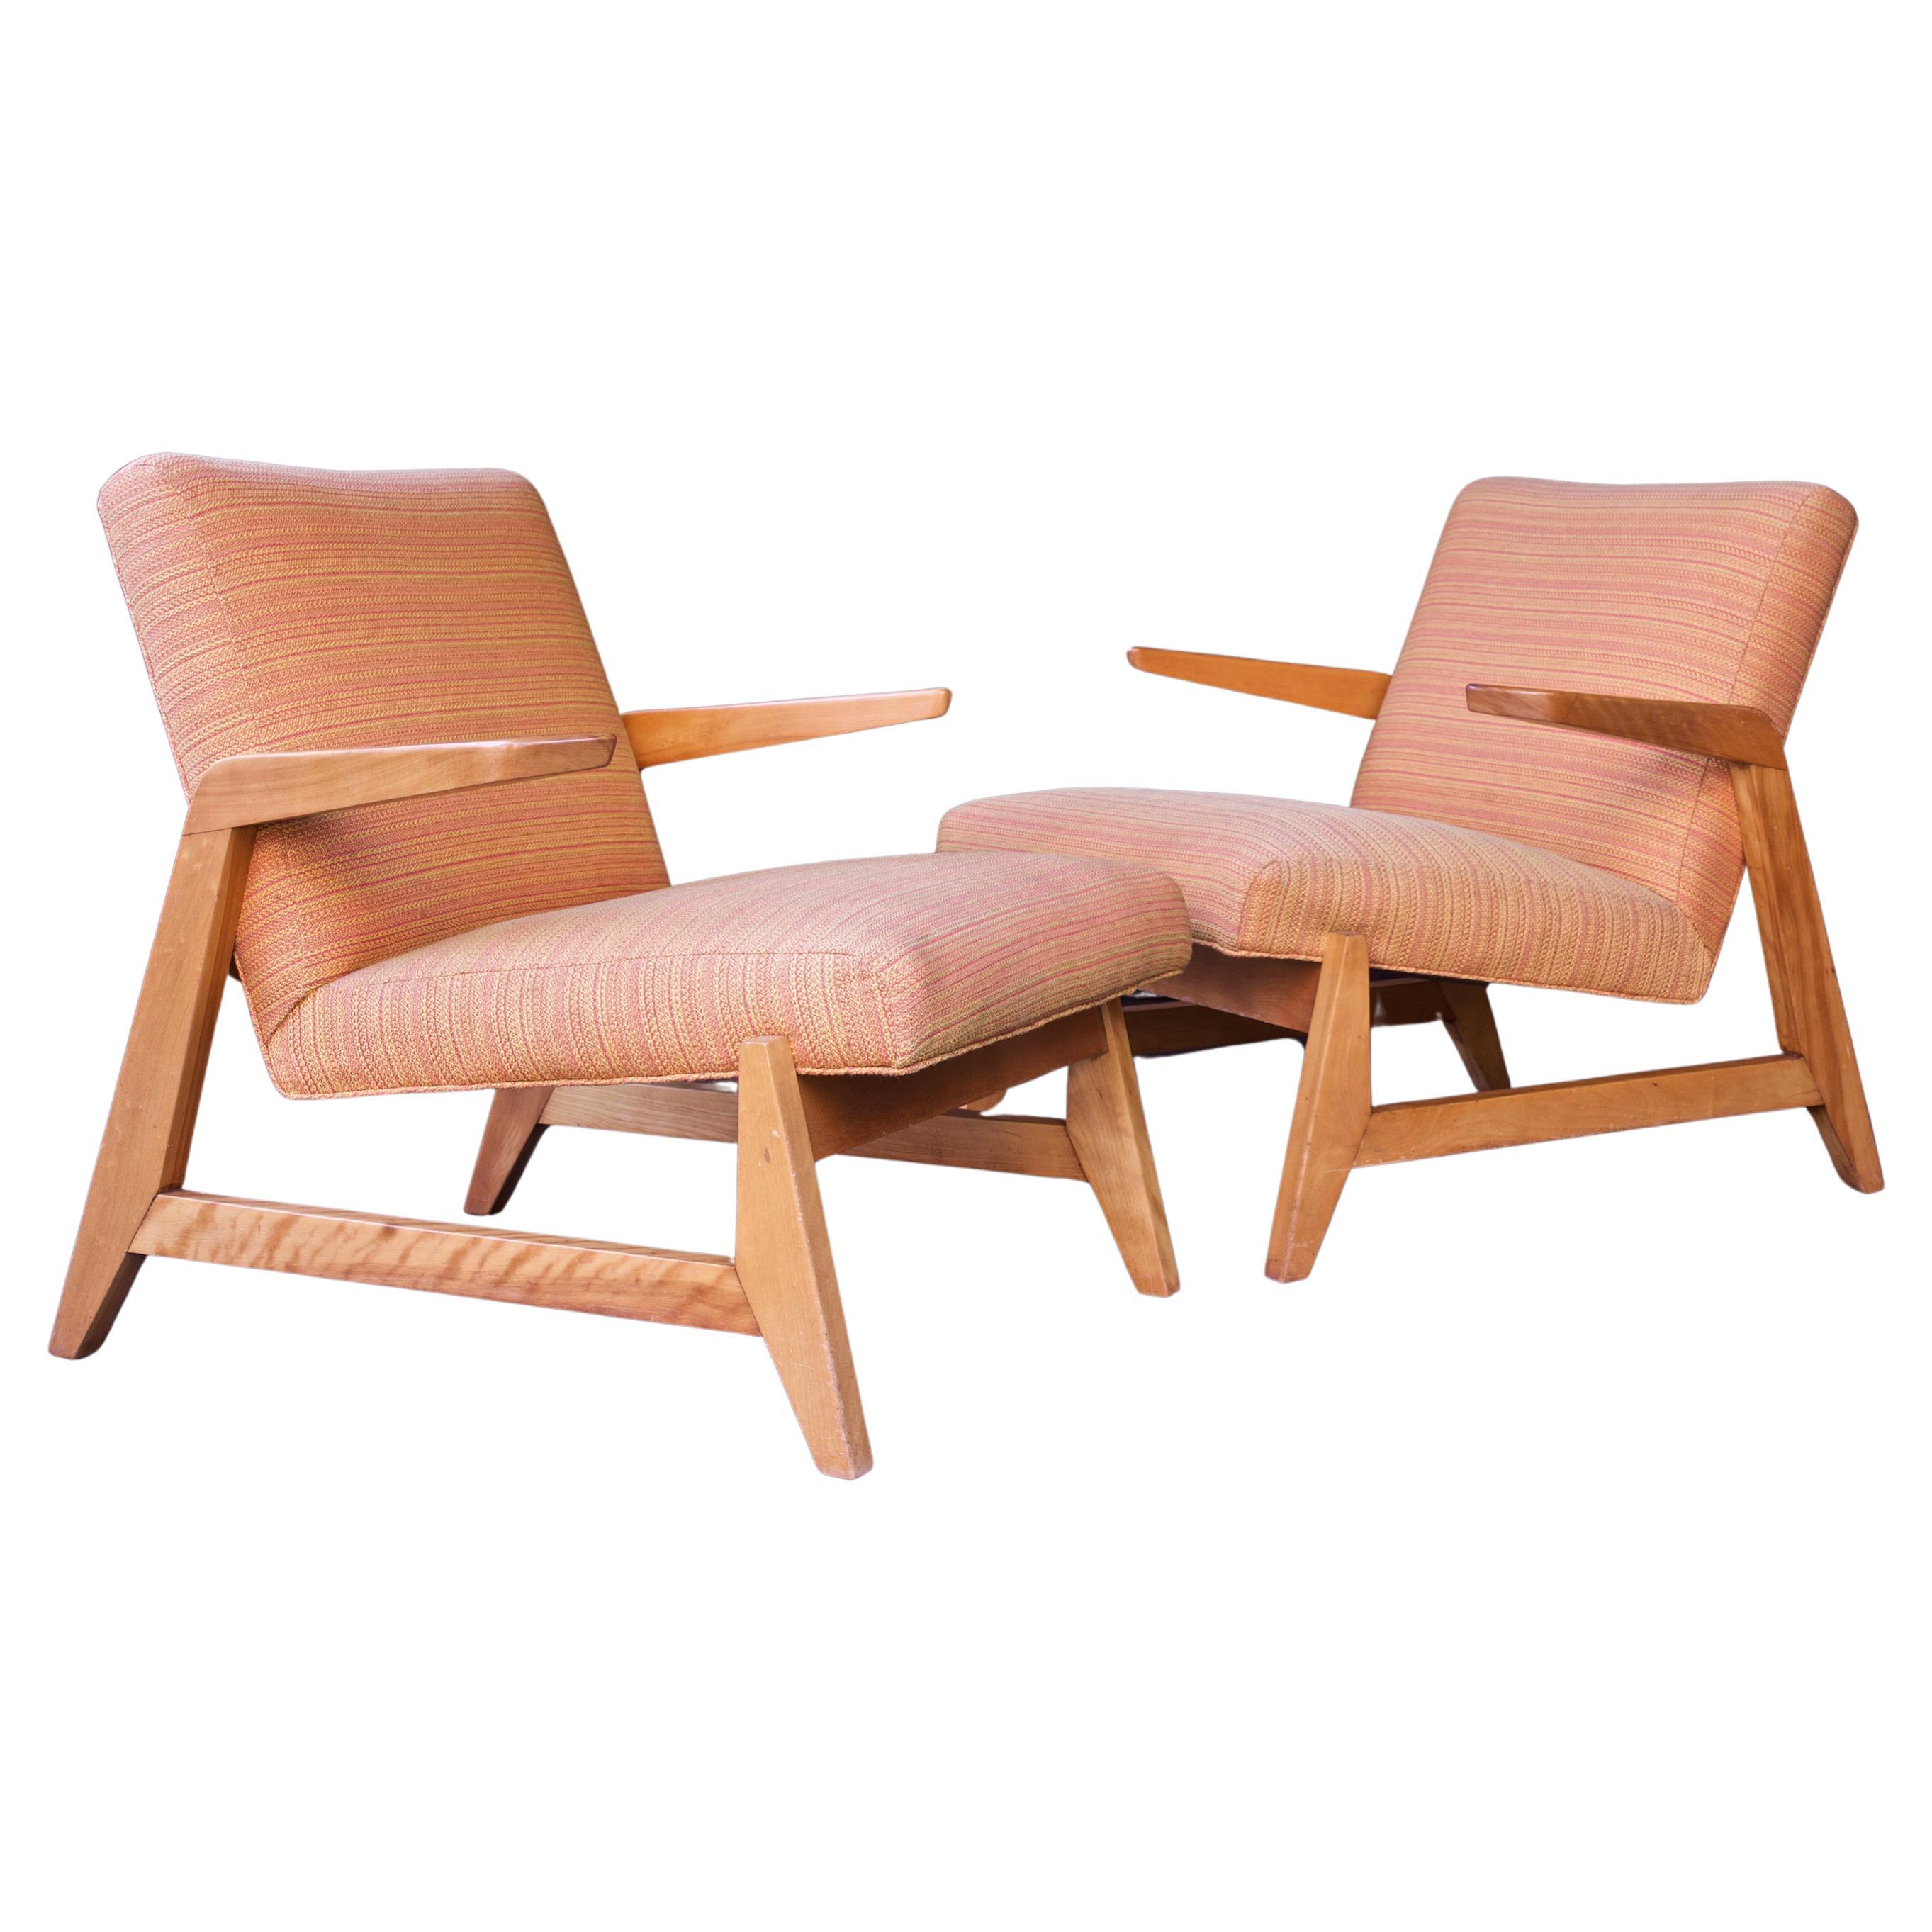 Pair Mid-Century Greenbelt Lounge Chairs by Ralph Rapson for Knoll 1940s Modern For Sale